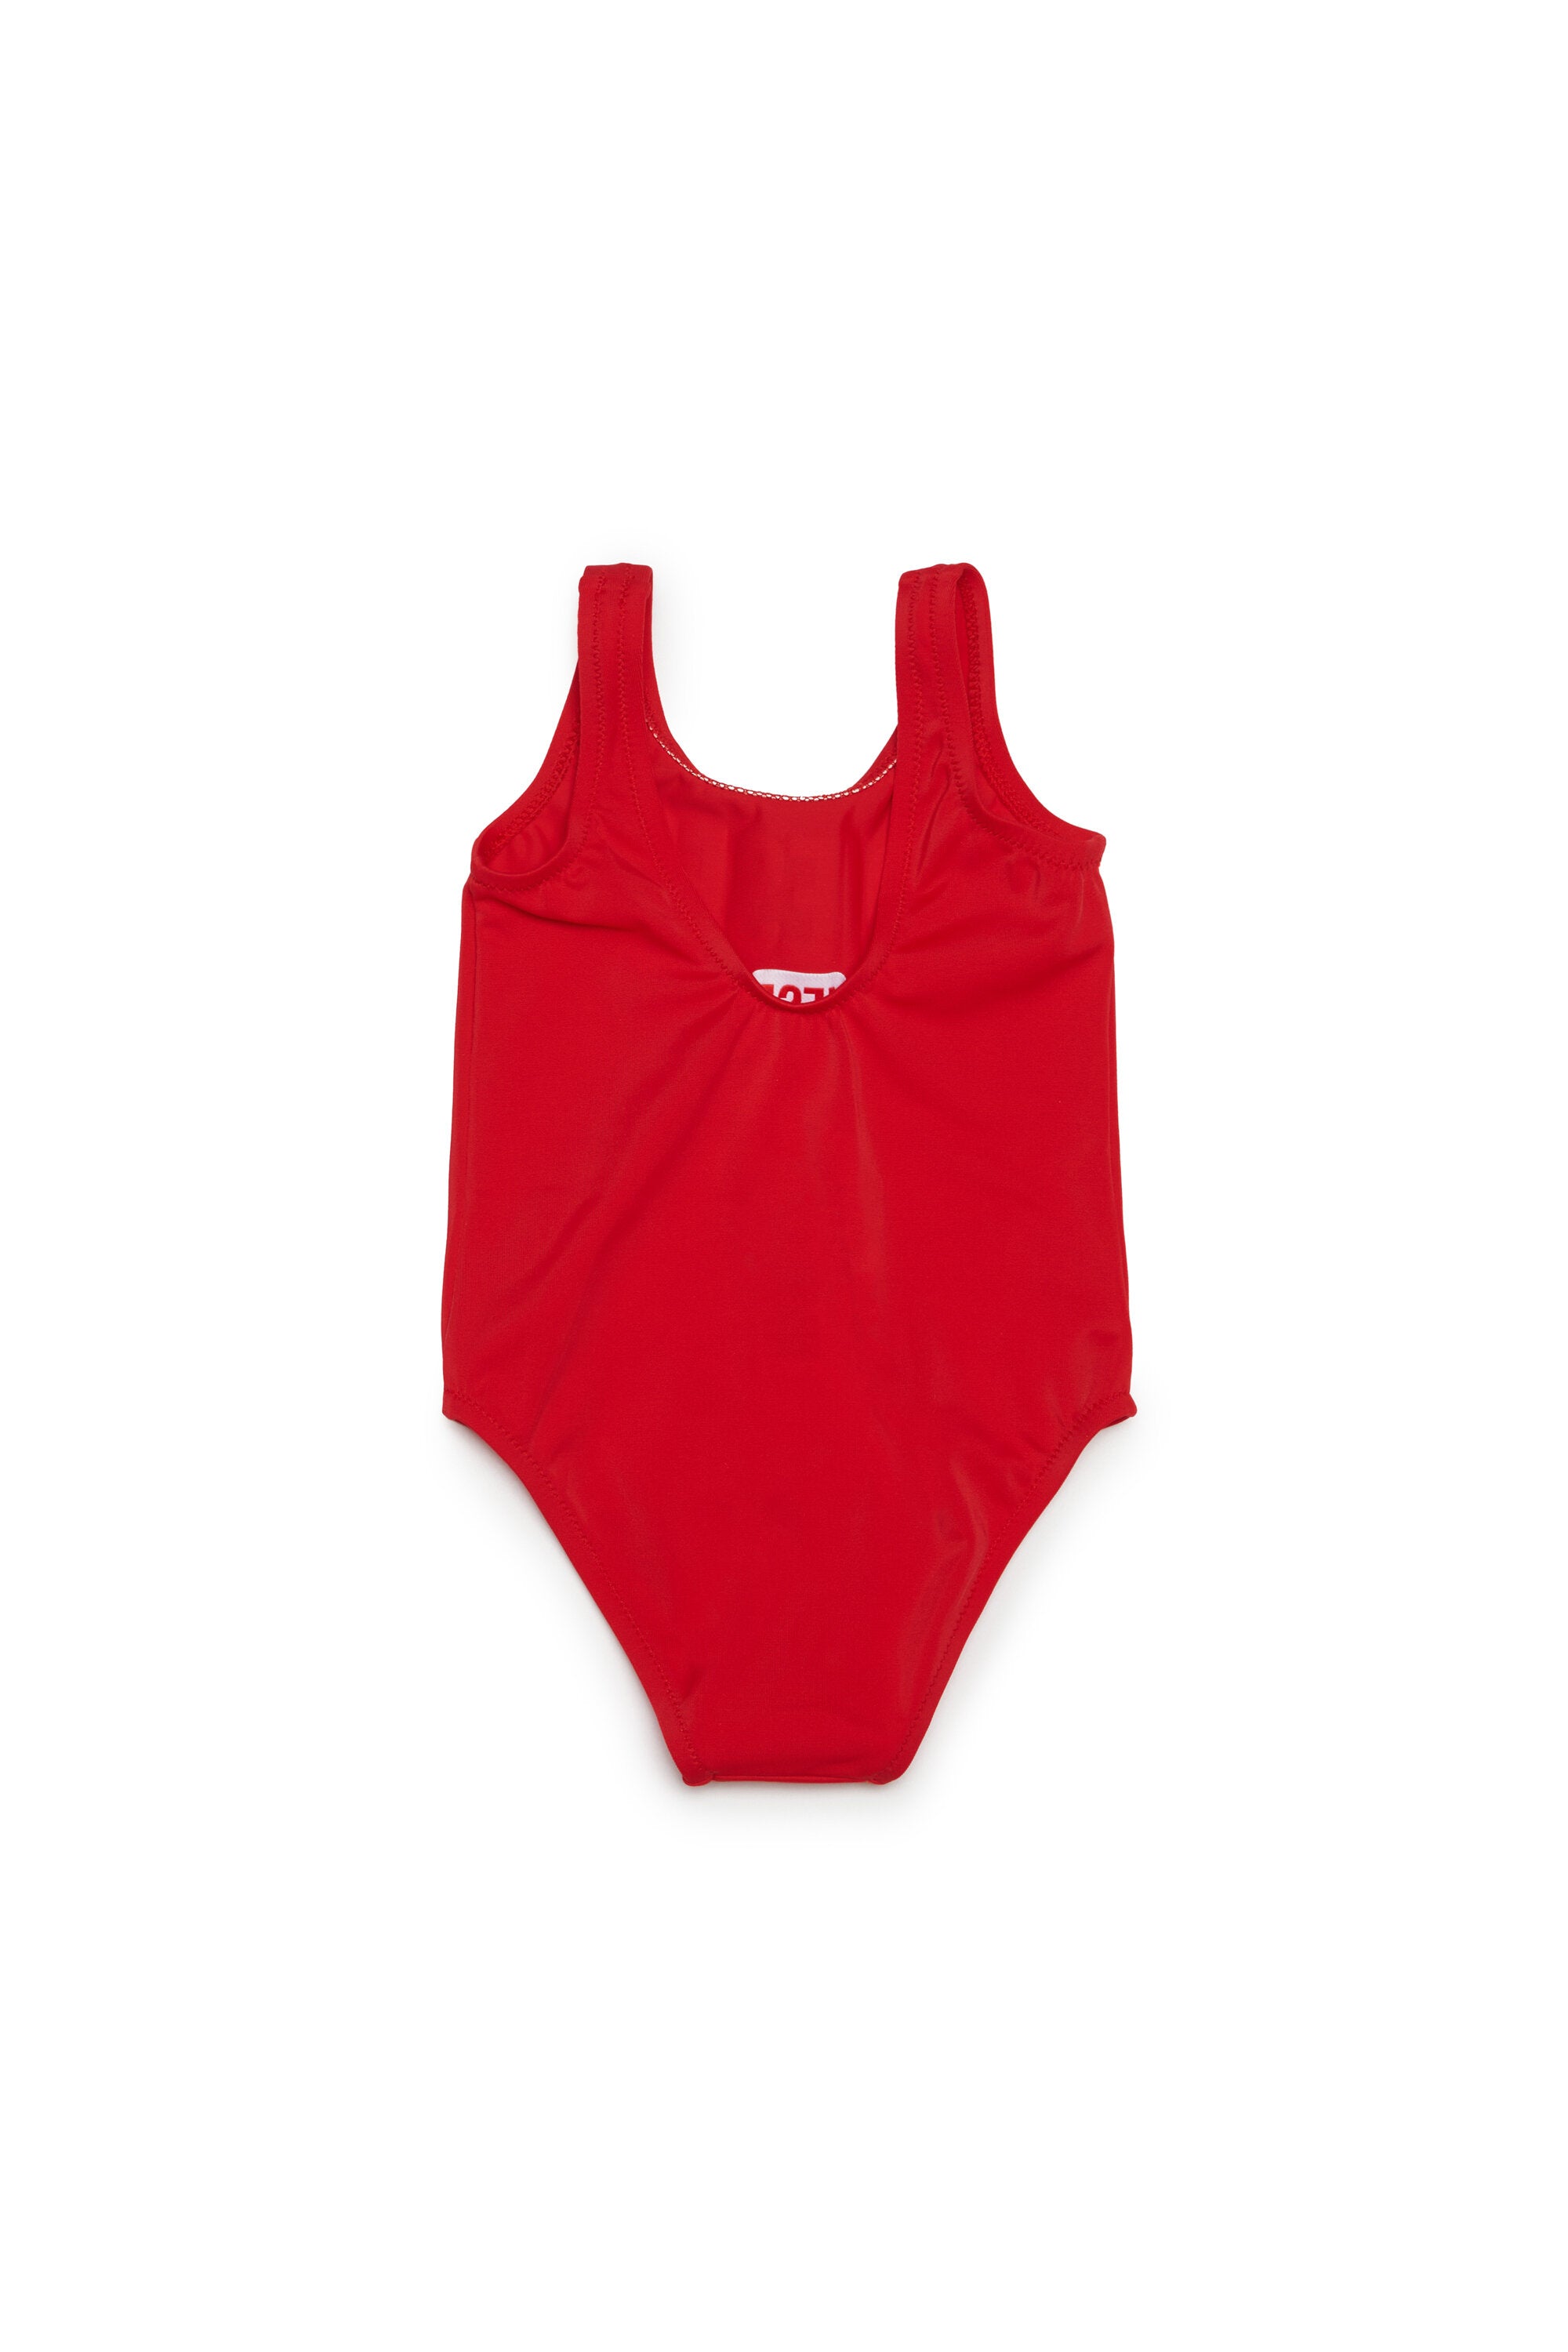 One-piece swimsuit branded with logo